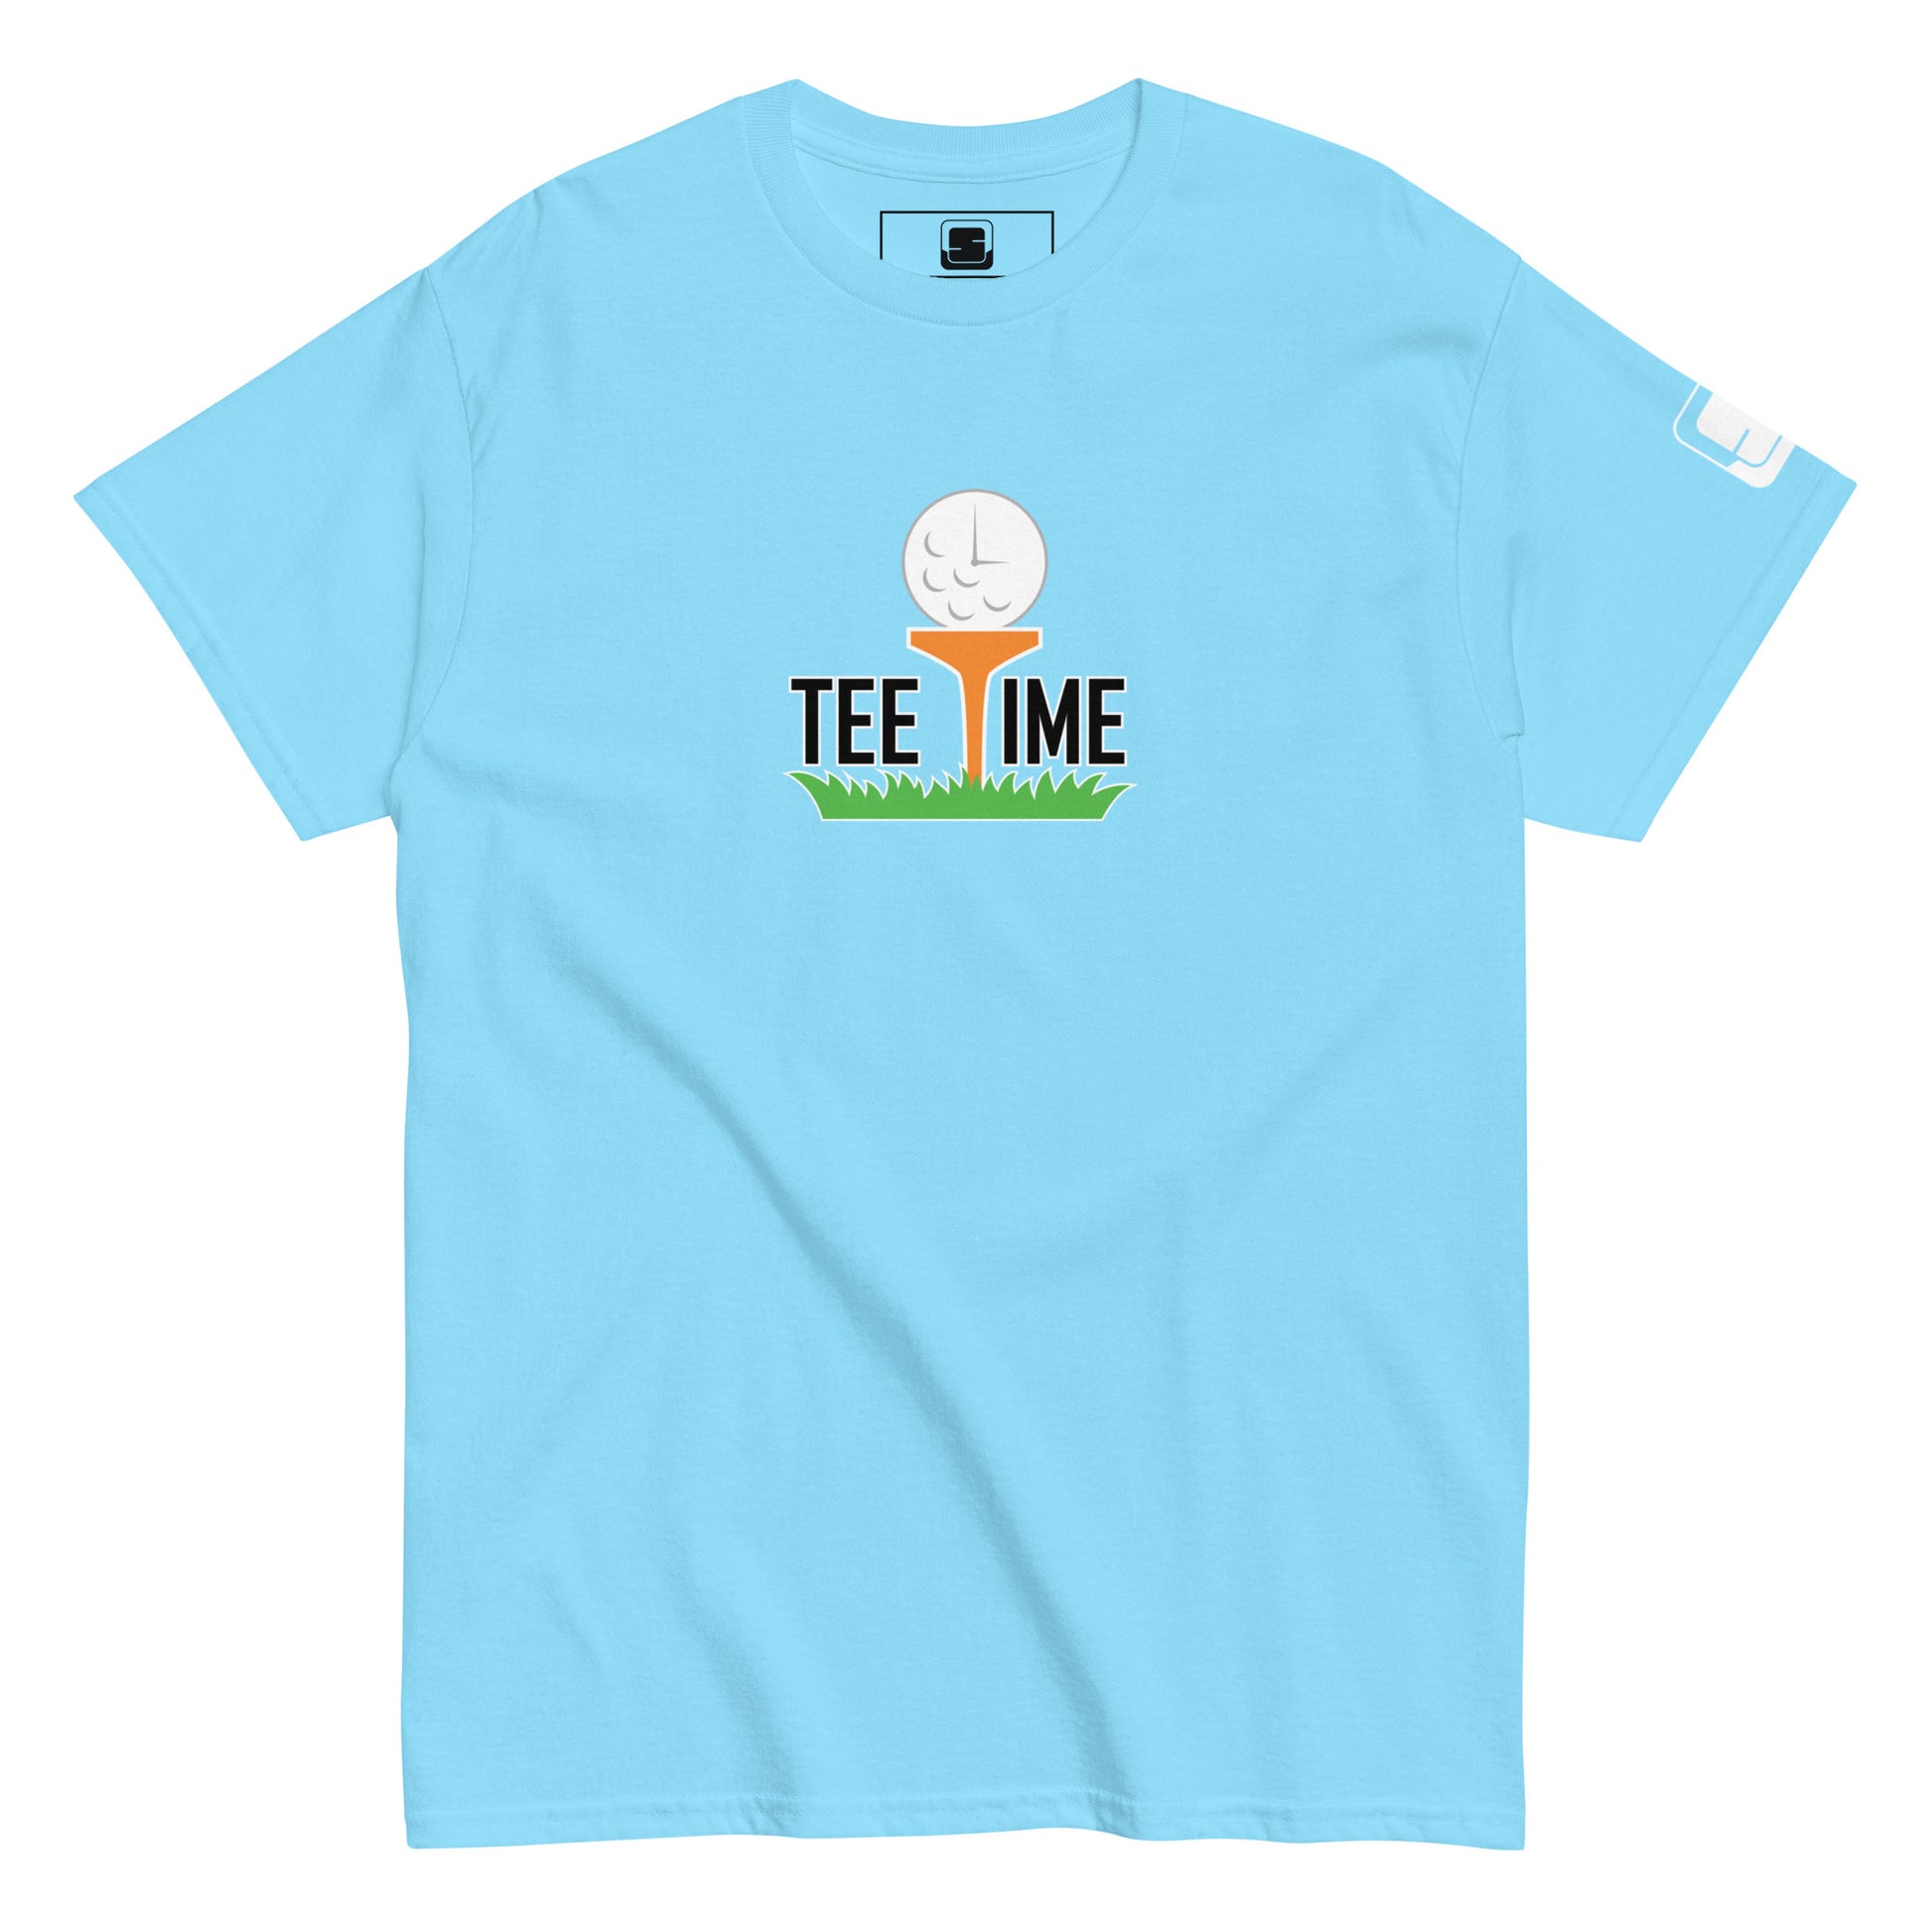 Light blue short-sleeved t-shirt with a 'Tee Time' graphic showing a golf ball character on grass on the chest and a small logo patch on the sleeve, against a white background.